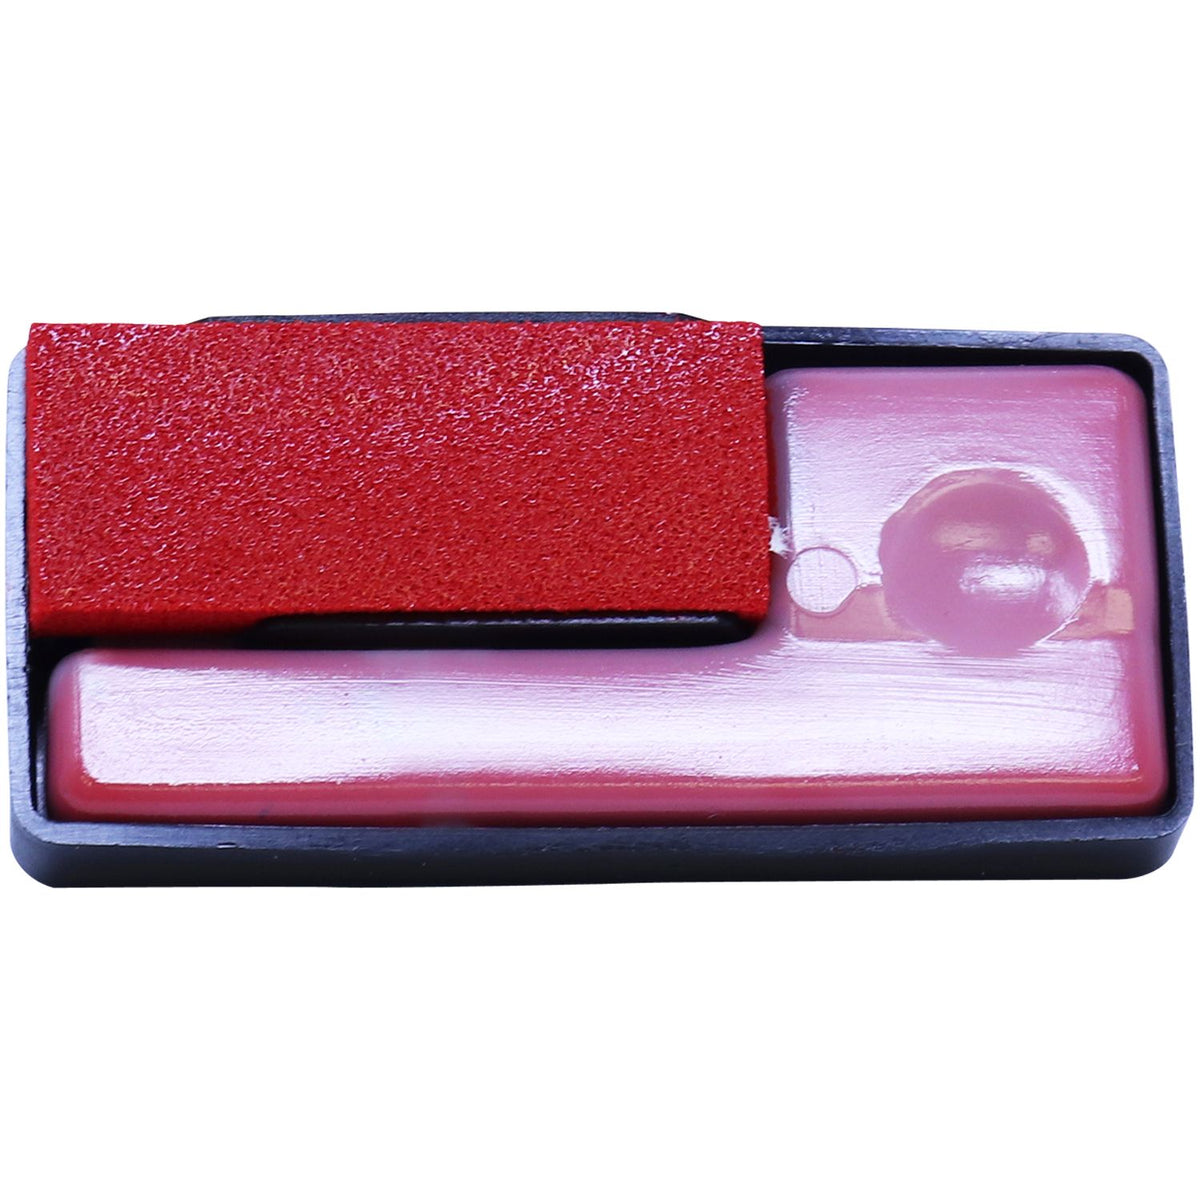 Replacement Pad For Reiner Type 2 Machines Red Front View